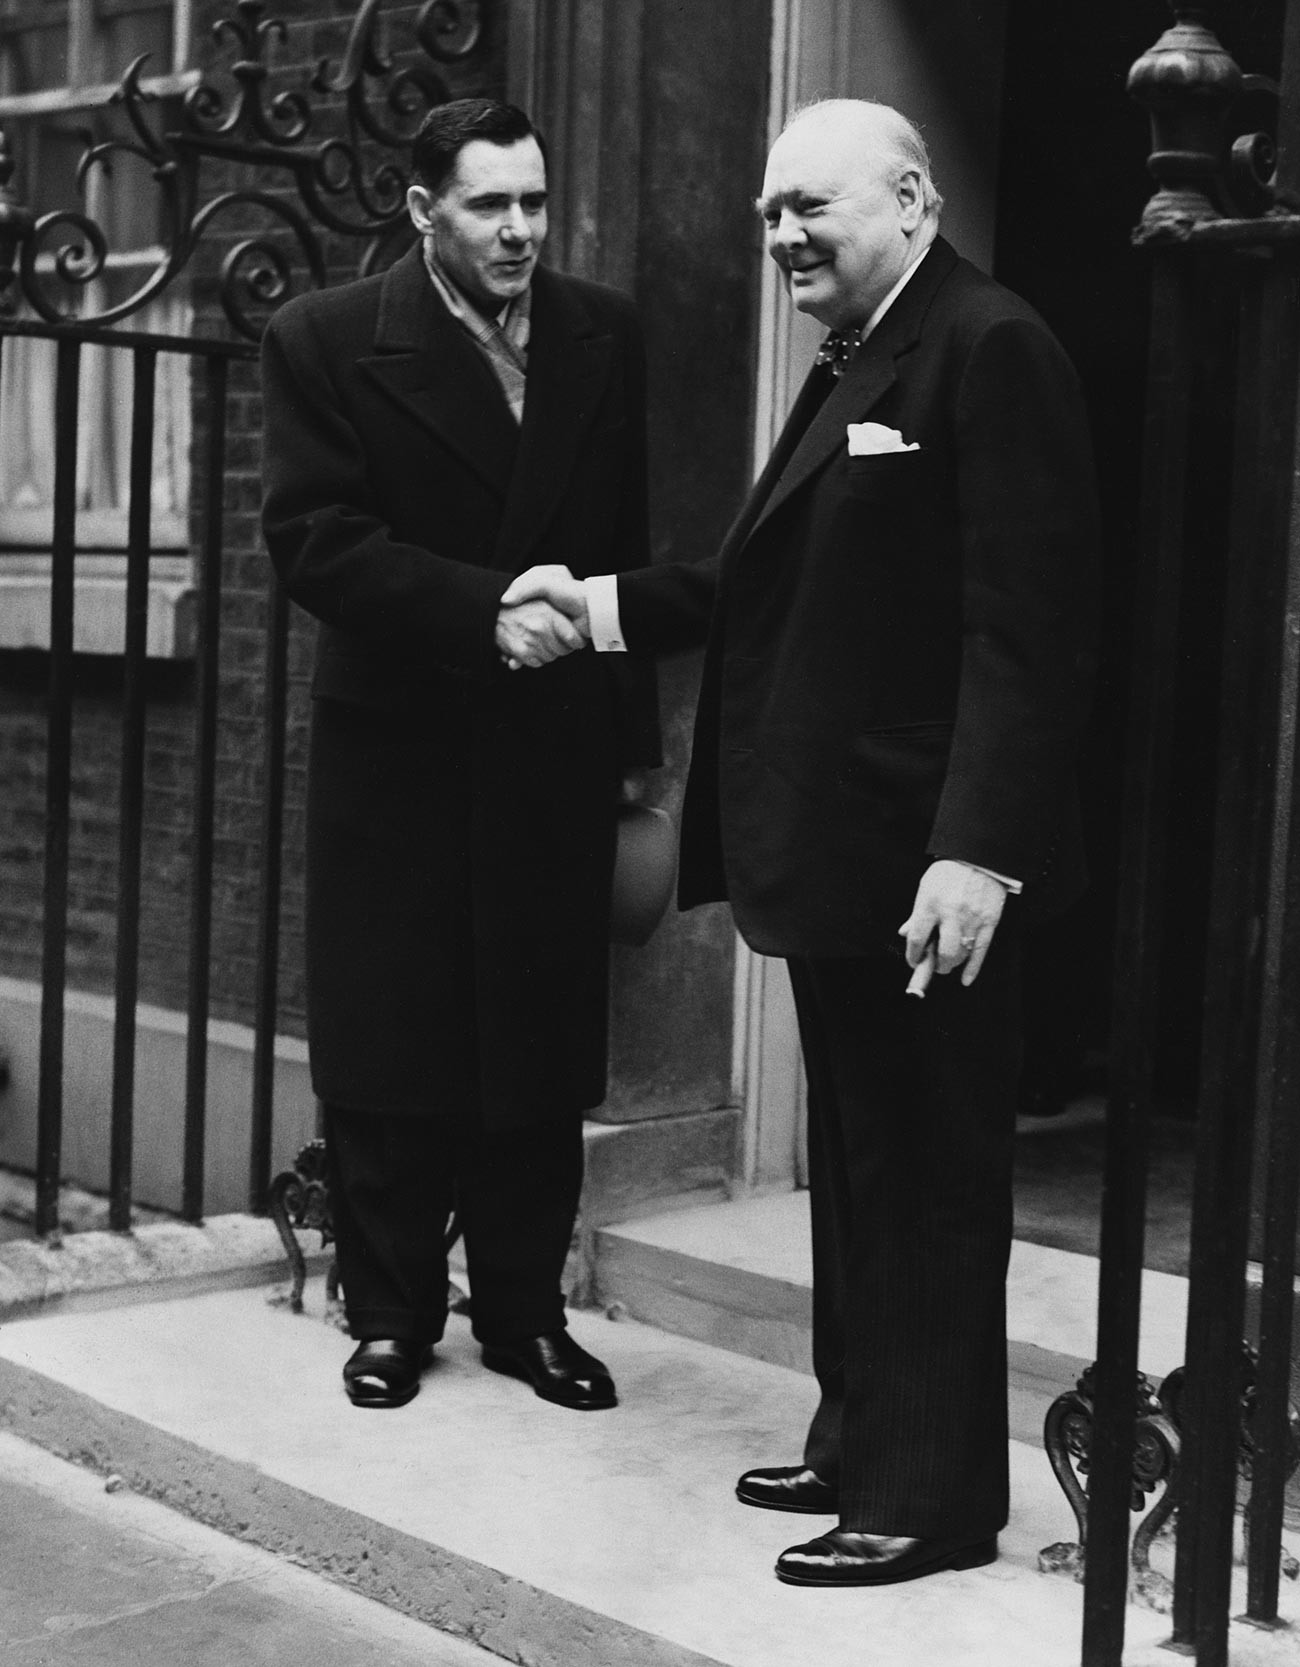 Andrei Gromyko, who became the Russian Ambassador to the UK in 1952, shakes hands with the Conservative Prime Minister, Winston Churchill outside 10 Downing Street.